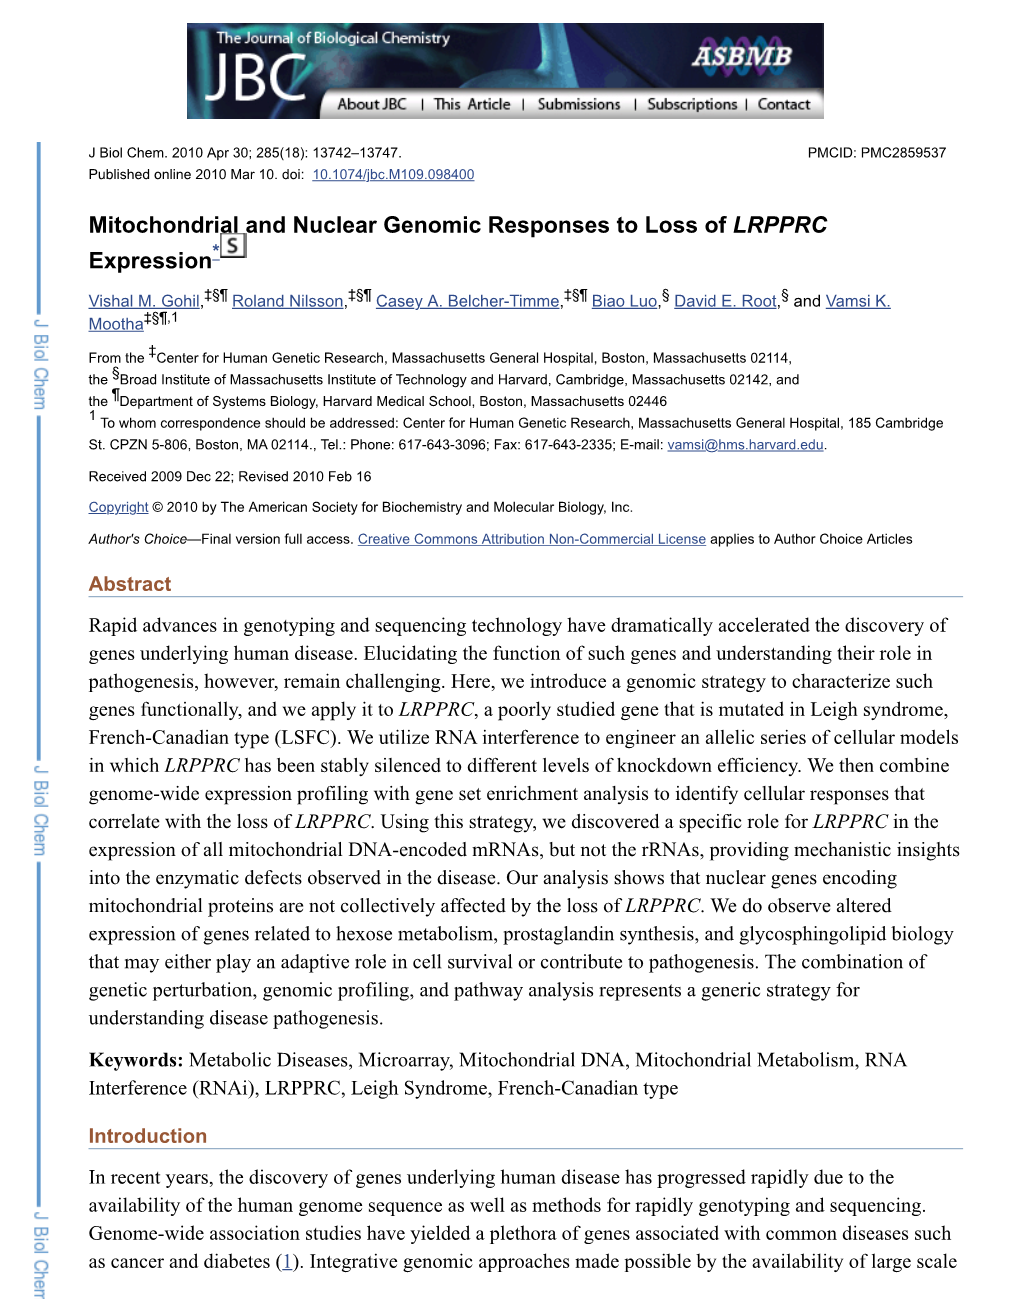 Mitochondrial and Nuclear Genomic Responses to Loss of LRPPRC Expression*